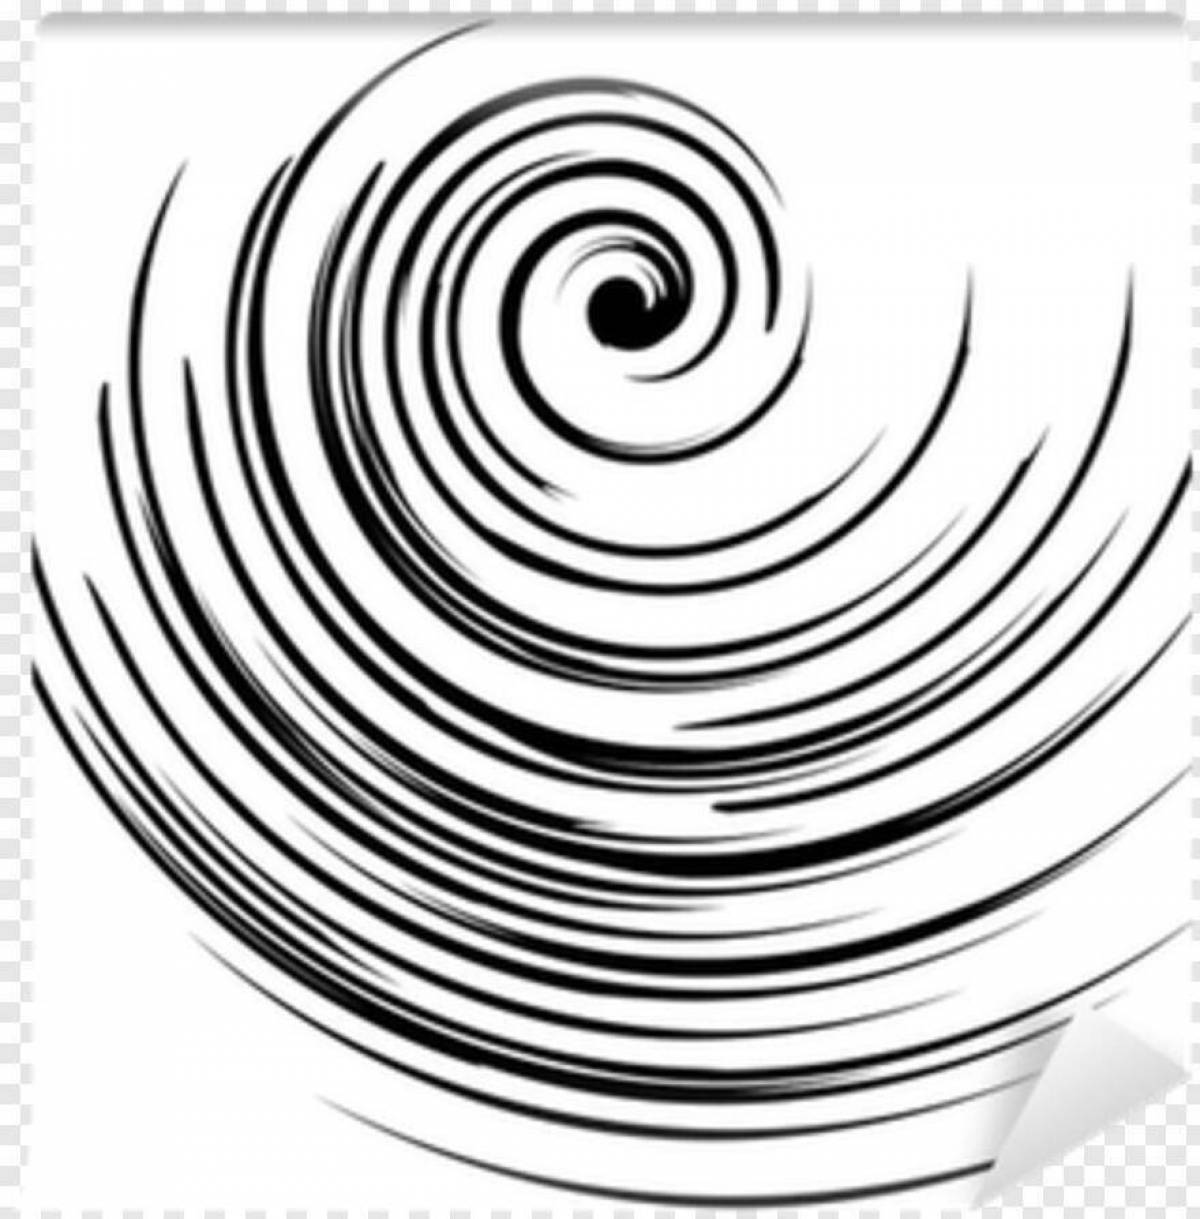 Dynamic swirling line coloring page